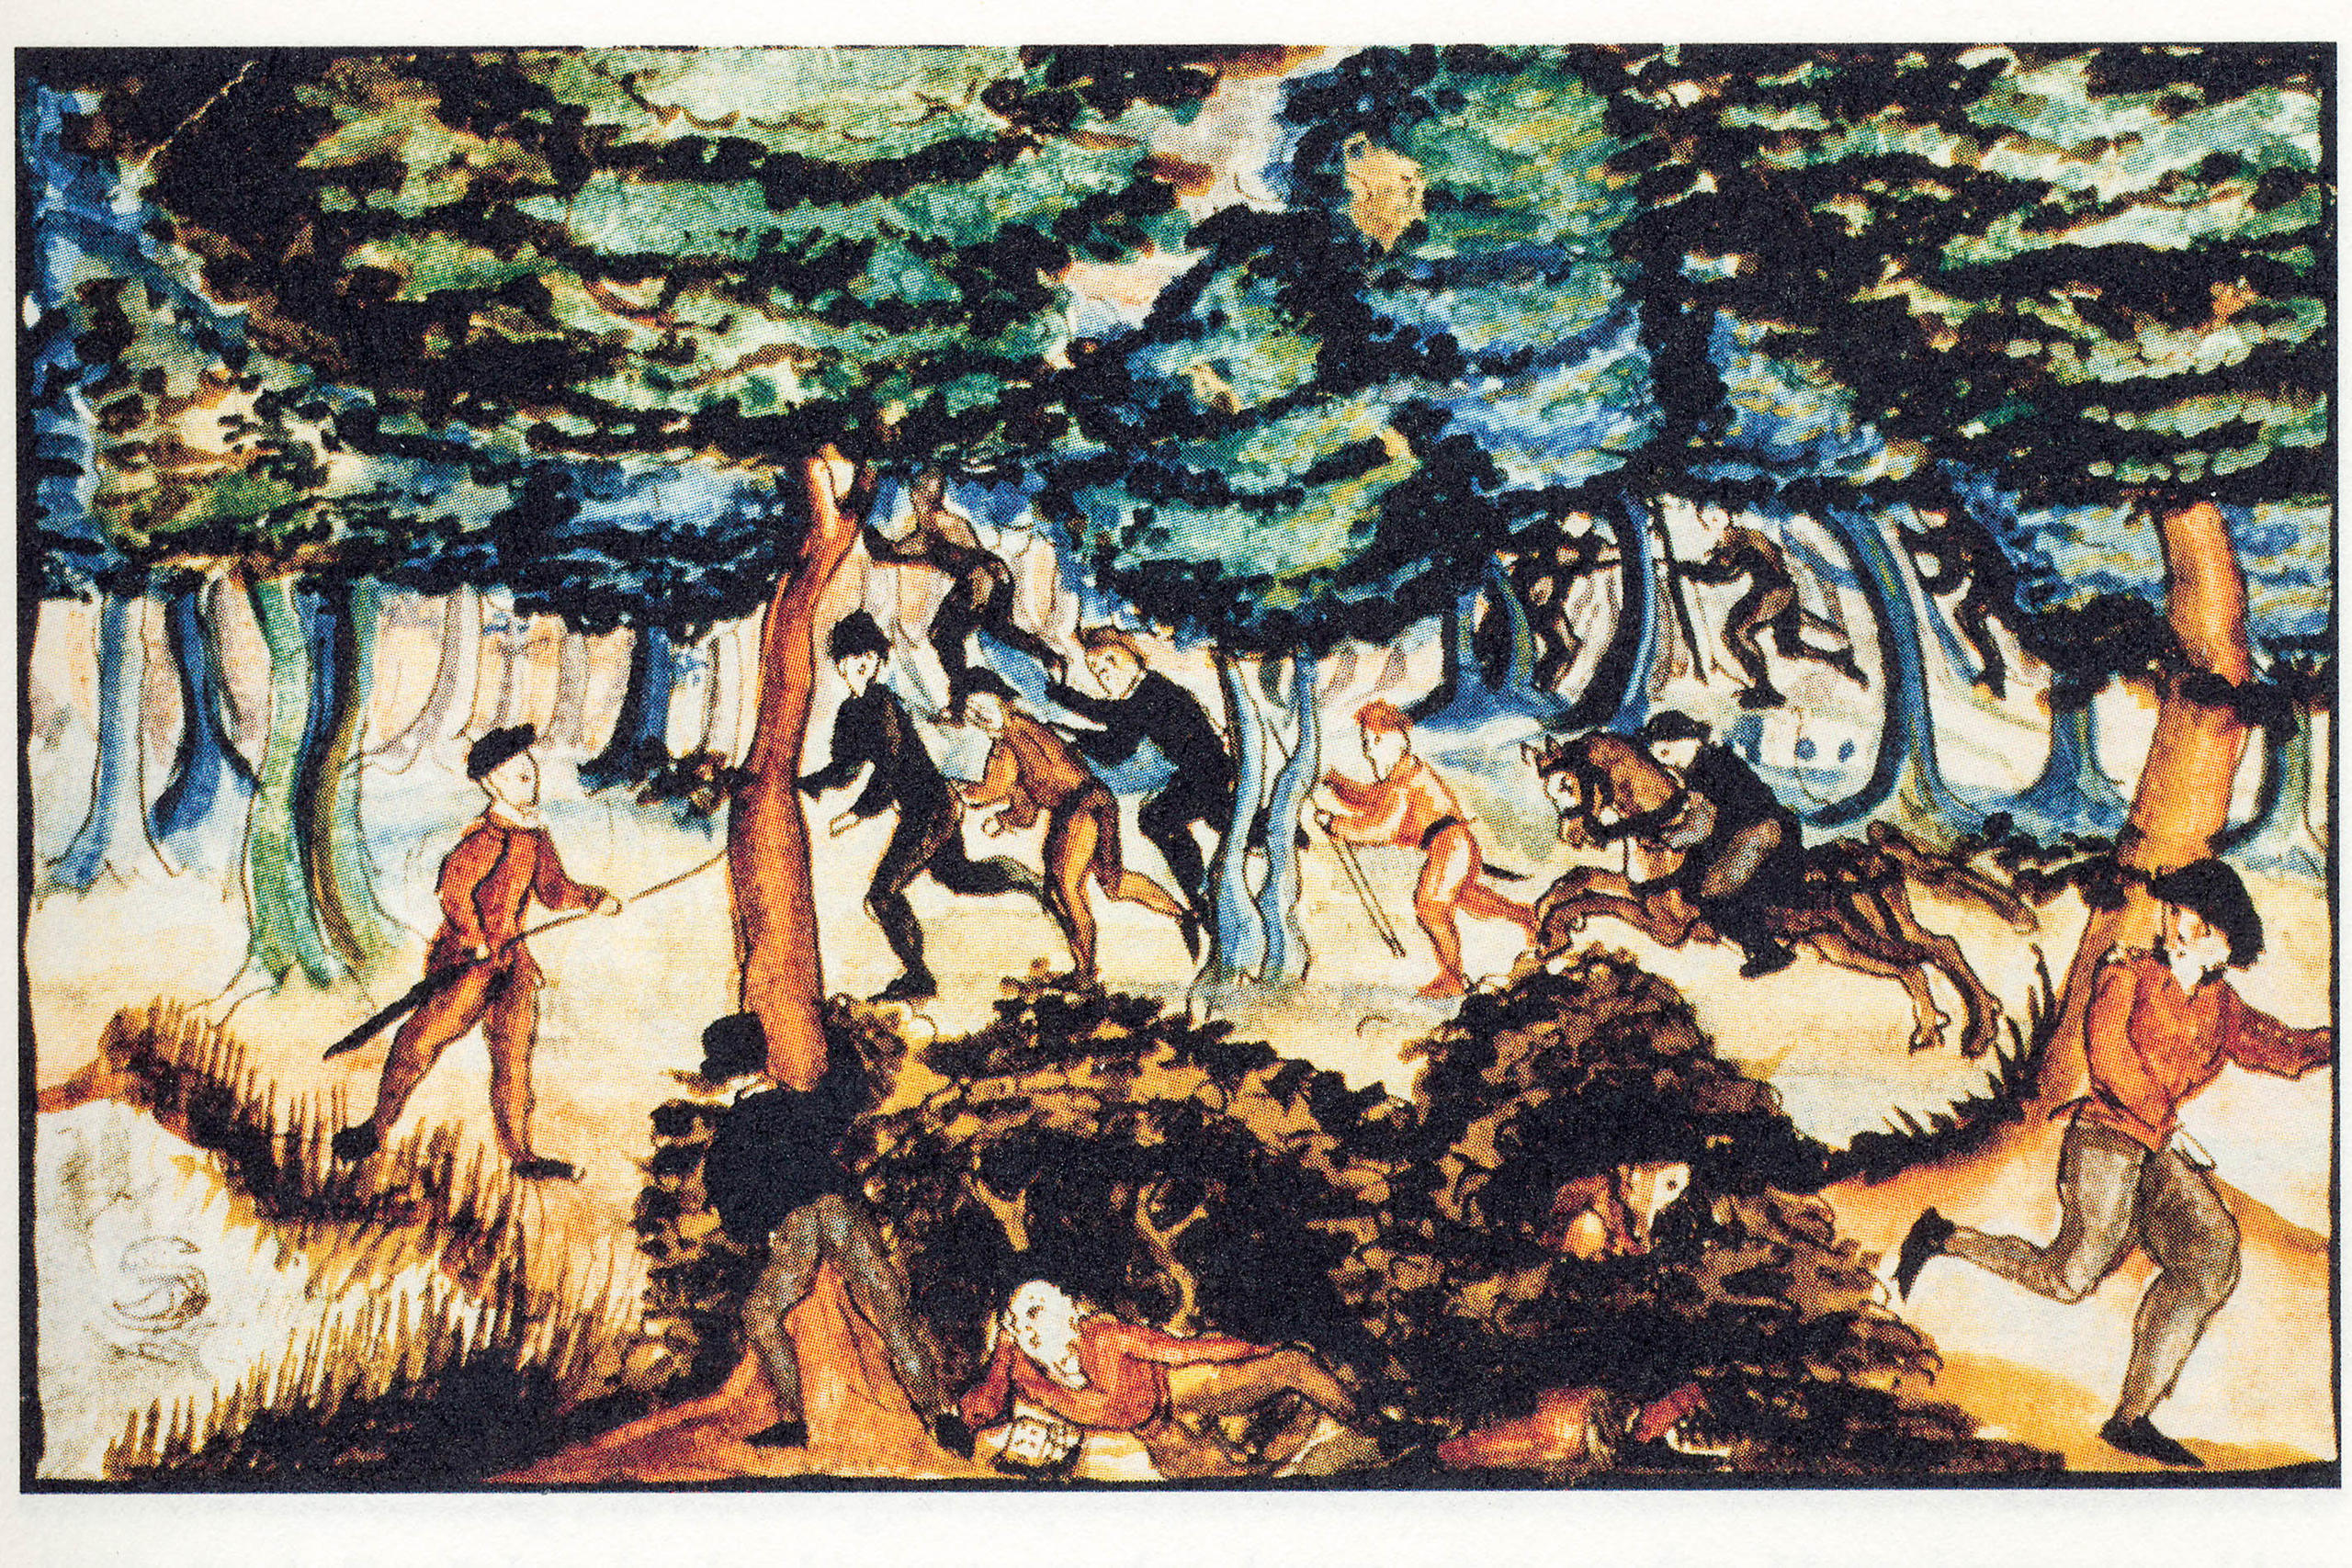 Illustration from 1605 about people chasing Anabaptists in a forest outside Zurich